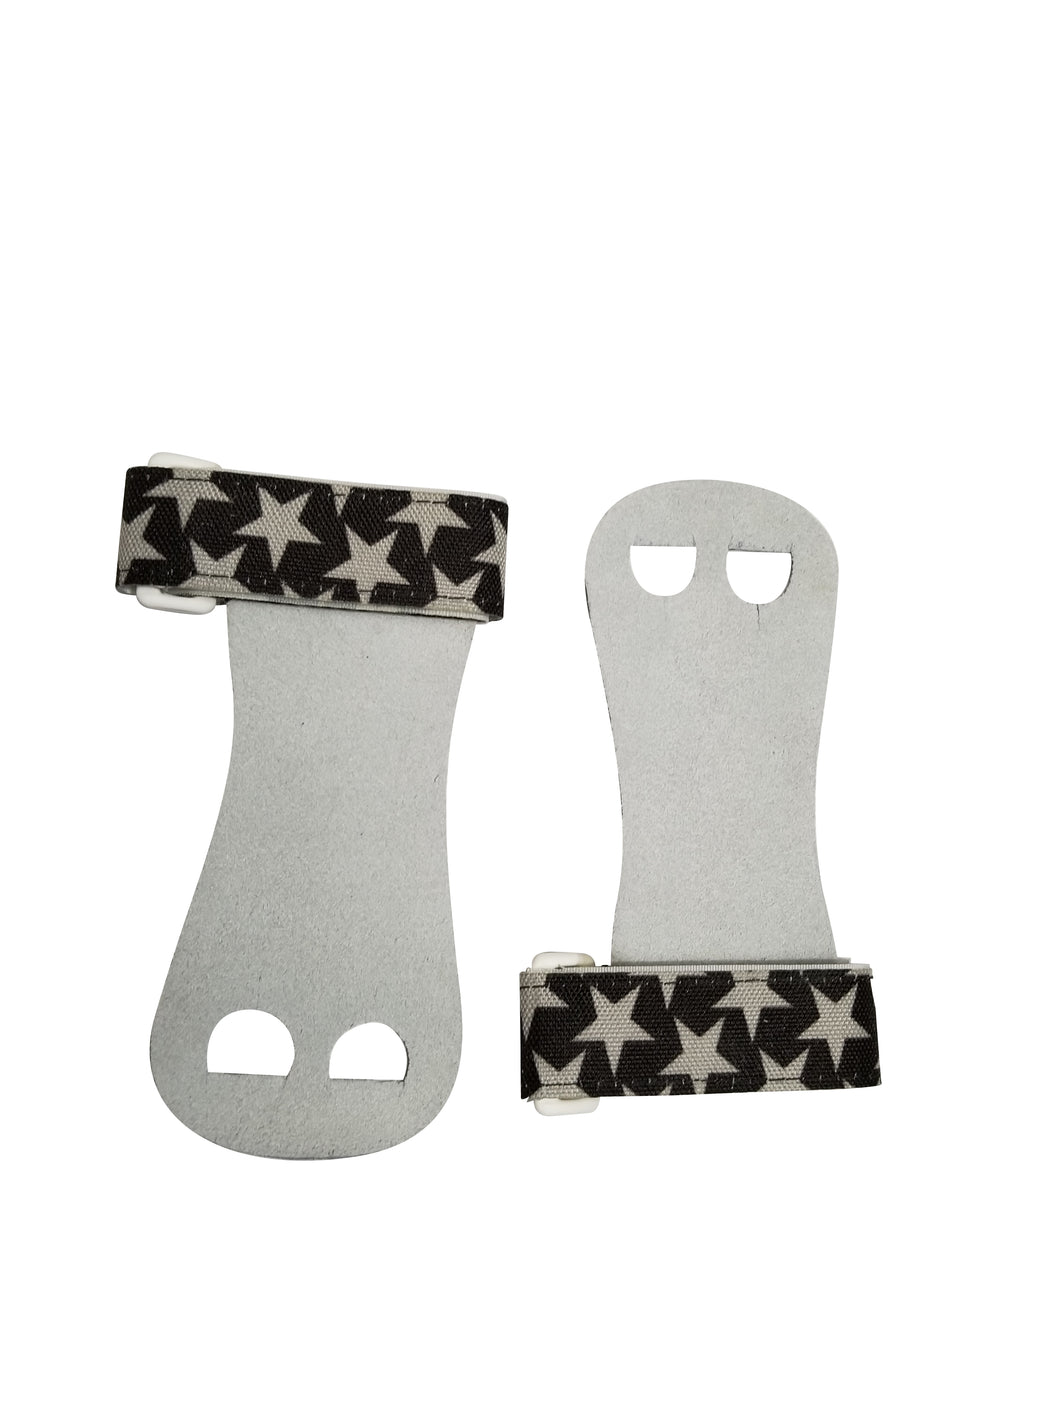 PUSH Athletic Gymnastics Youth Hand Grips White Stars with Black Band